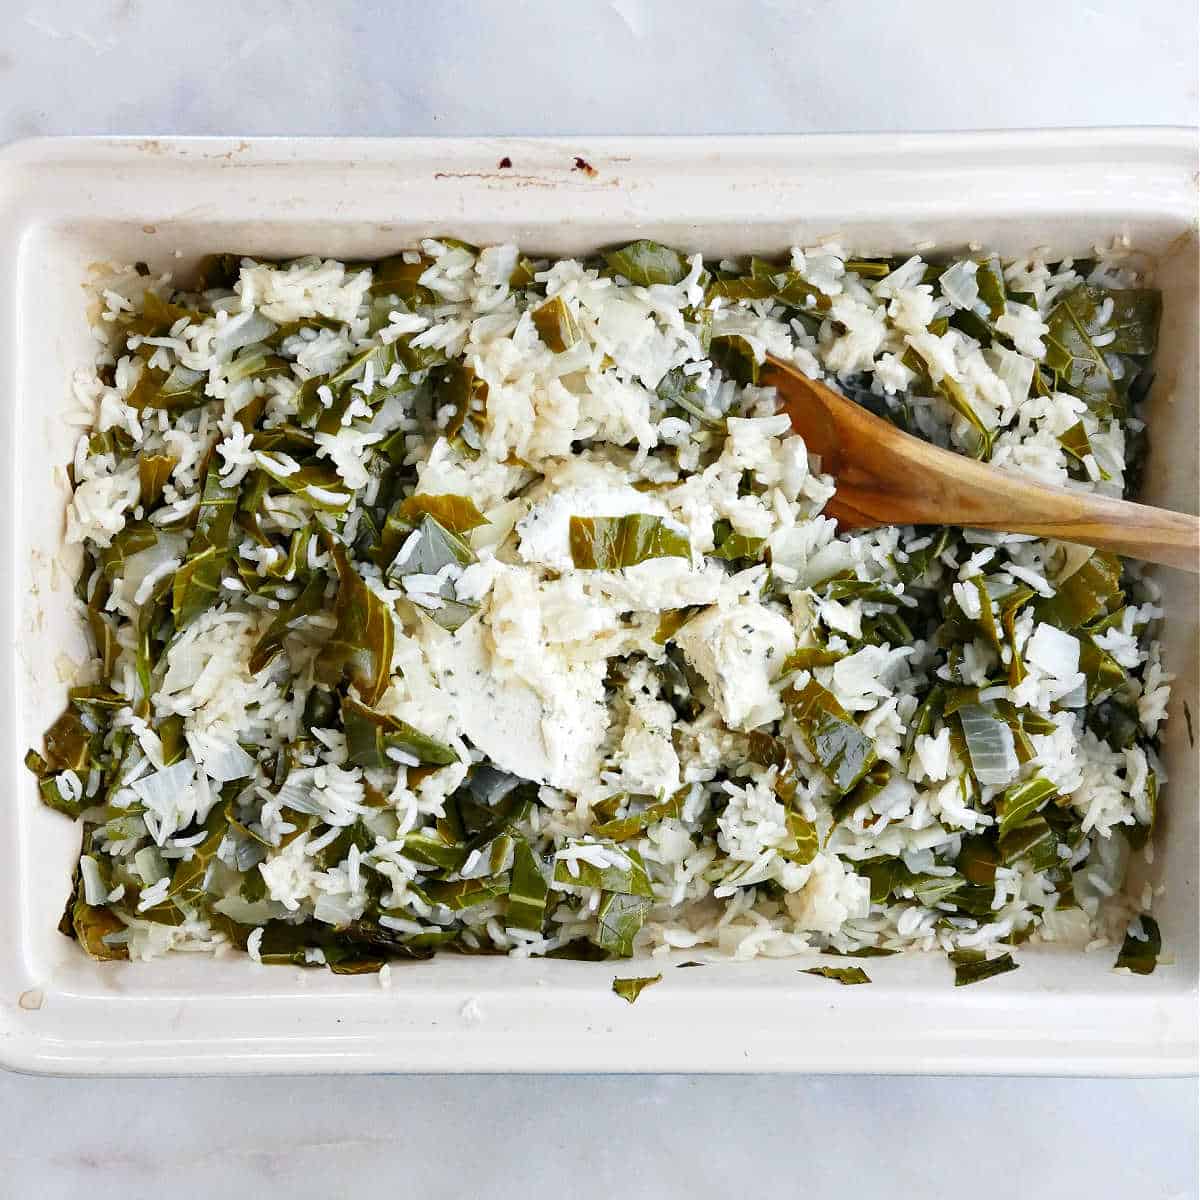 Boursin cheese being stirred into collard greens and rice with a spoon in a dish